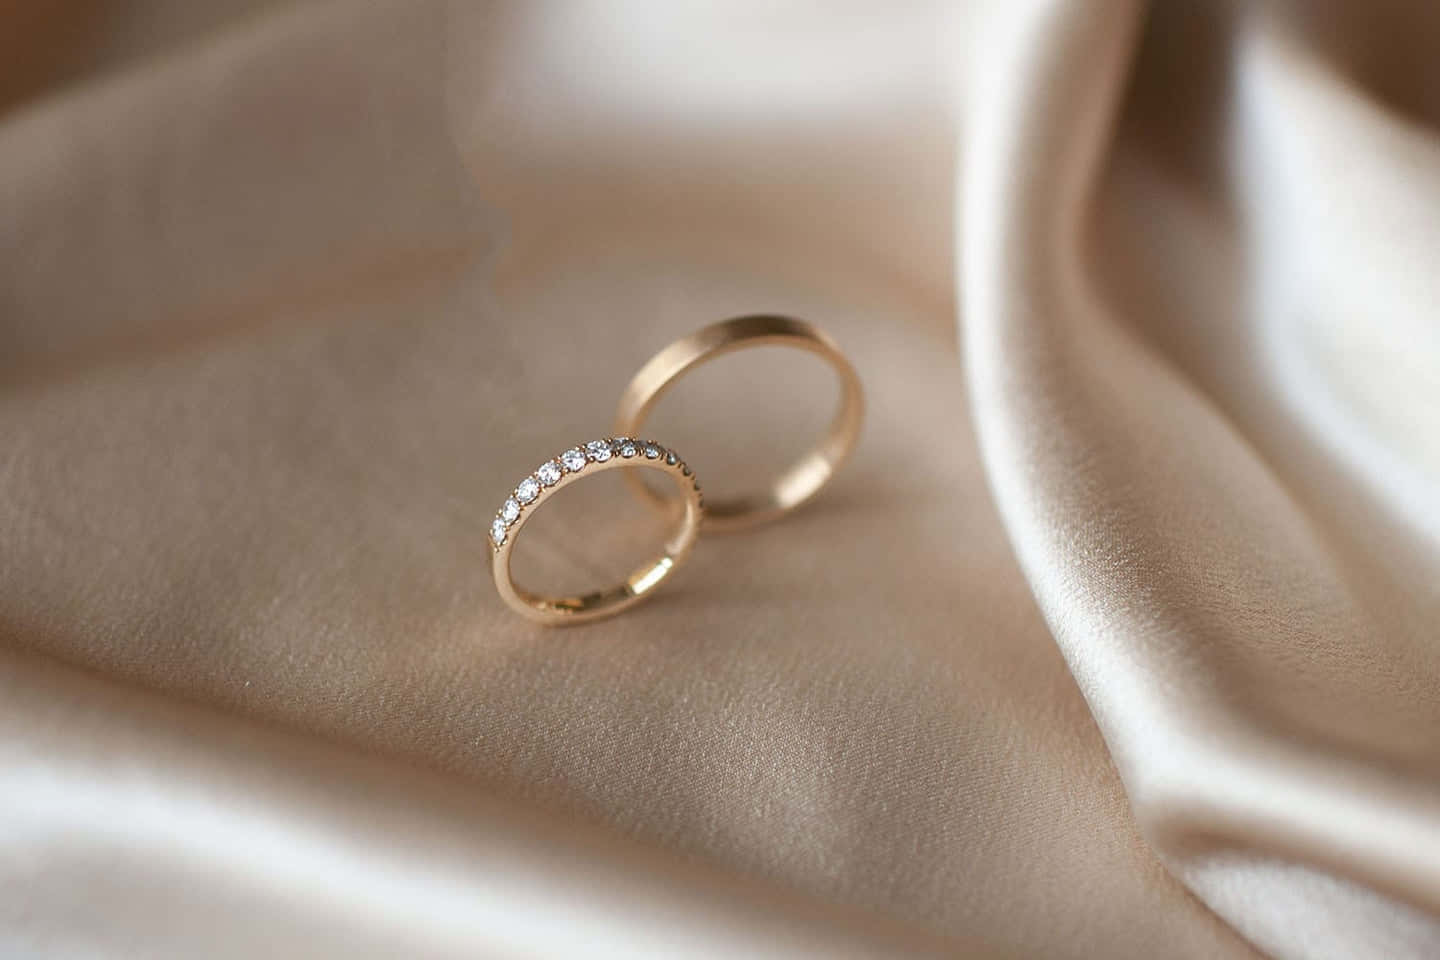 Symbol of true love and commitment - two shimmering wedding rings.